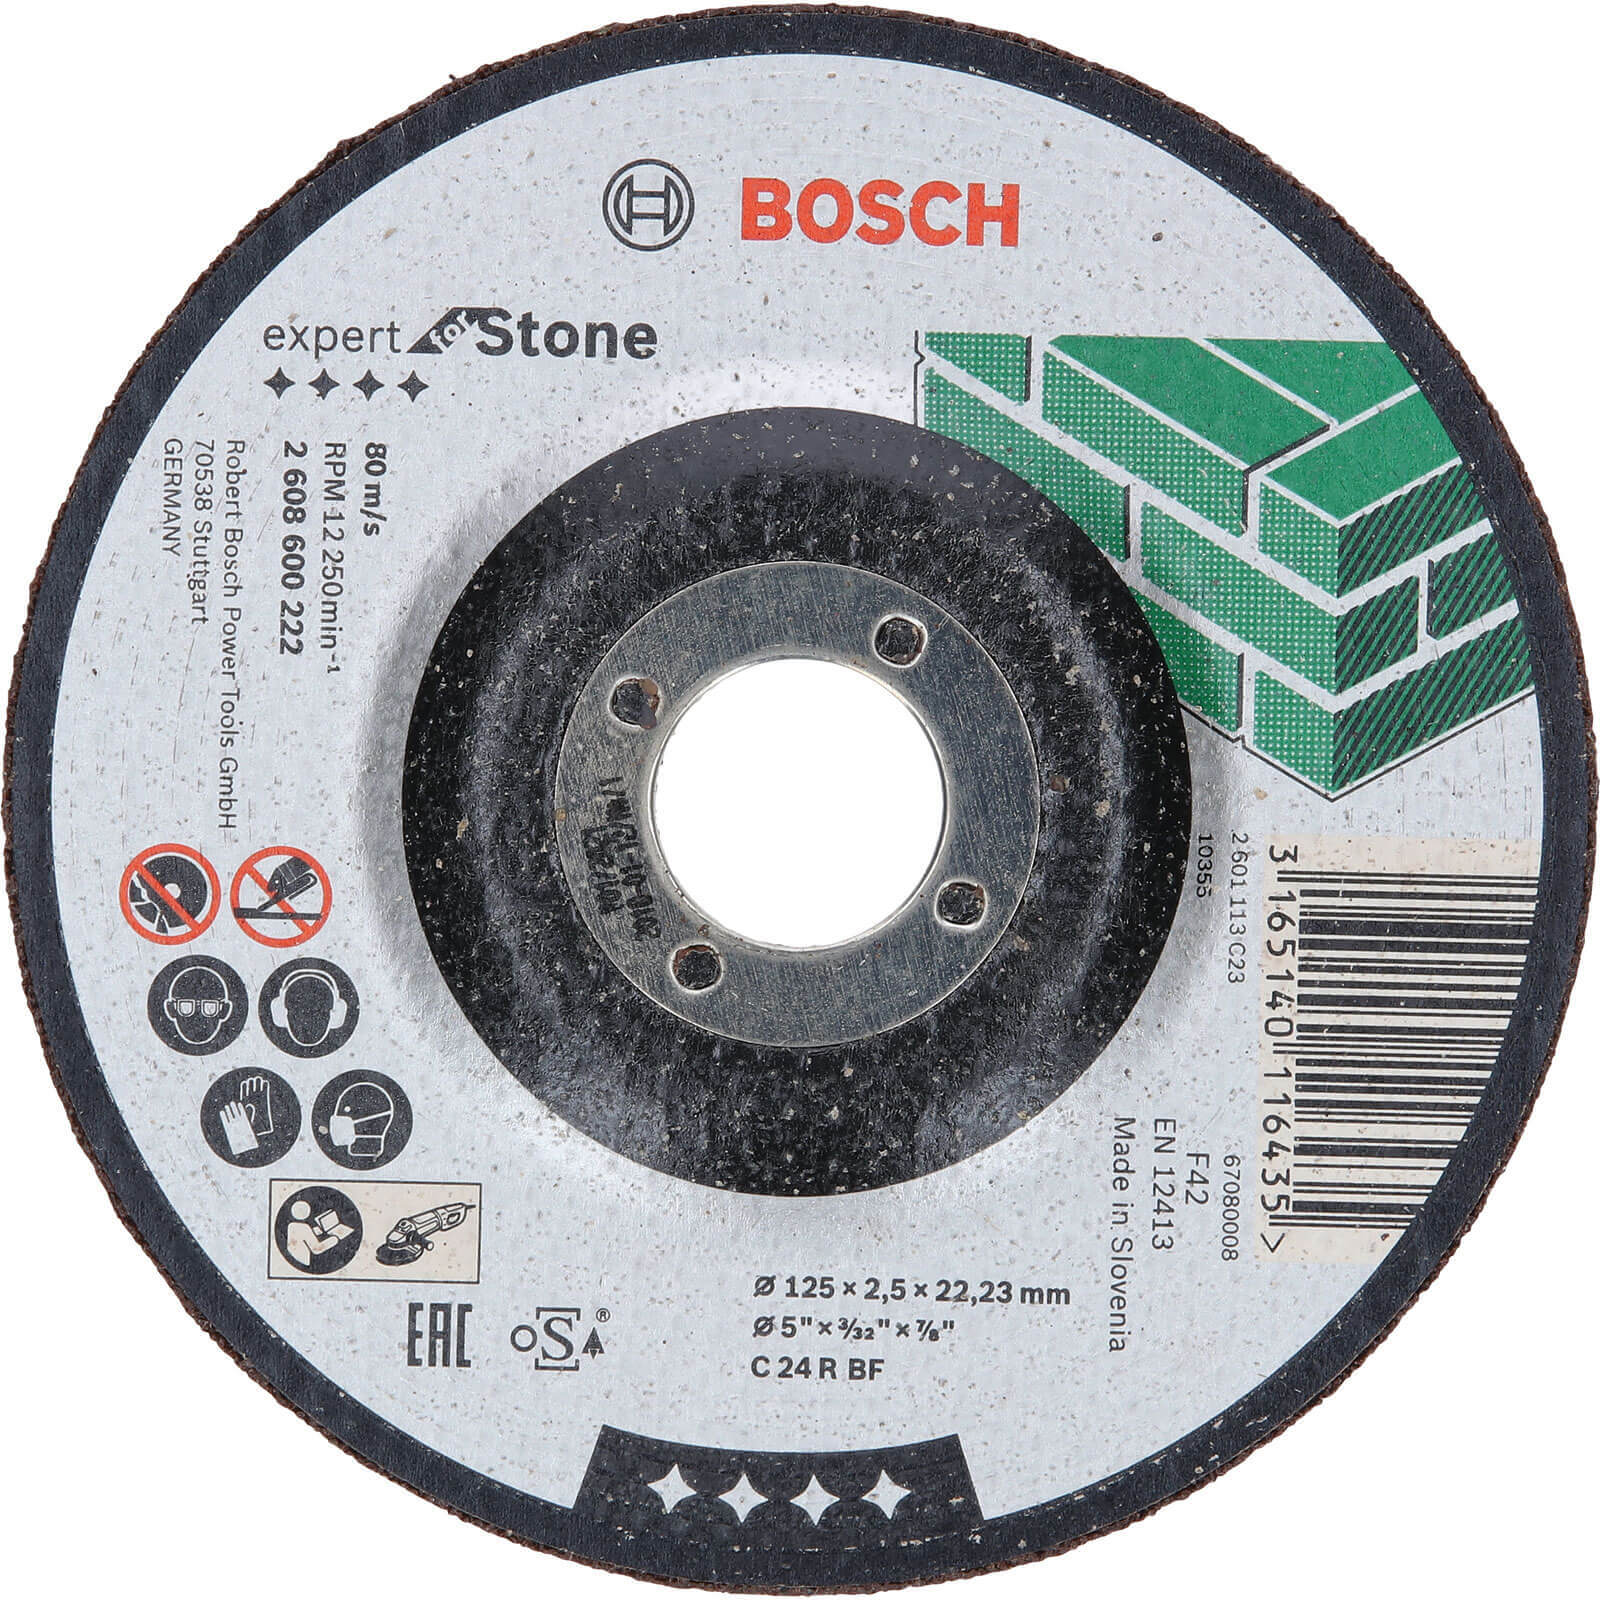 Image of Bosch C24R BF Depressed Stone Cutting Disc 125mm